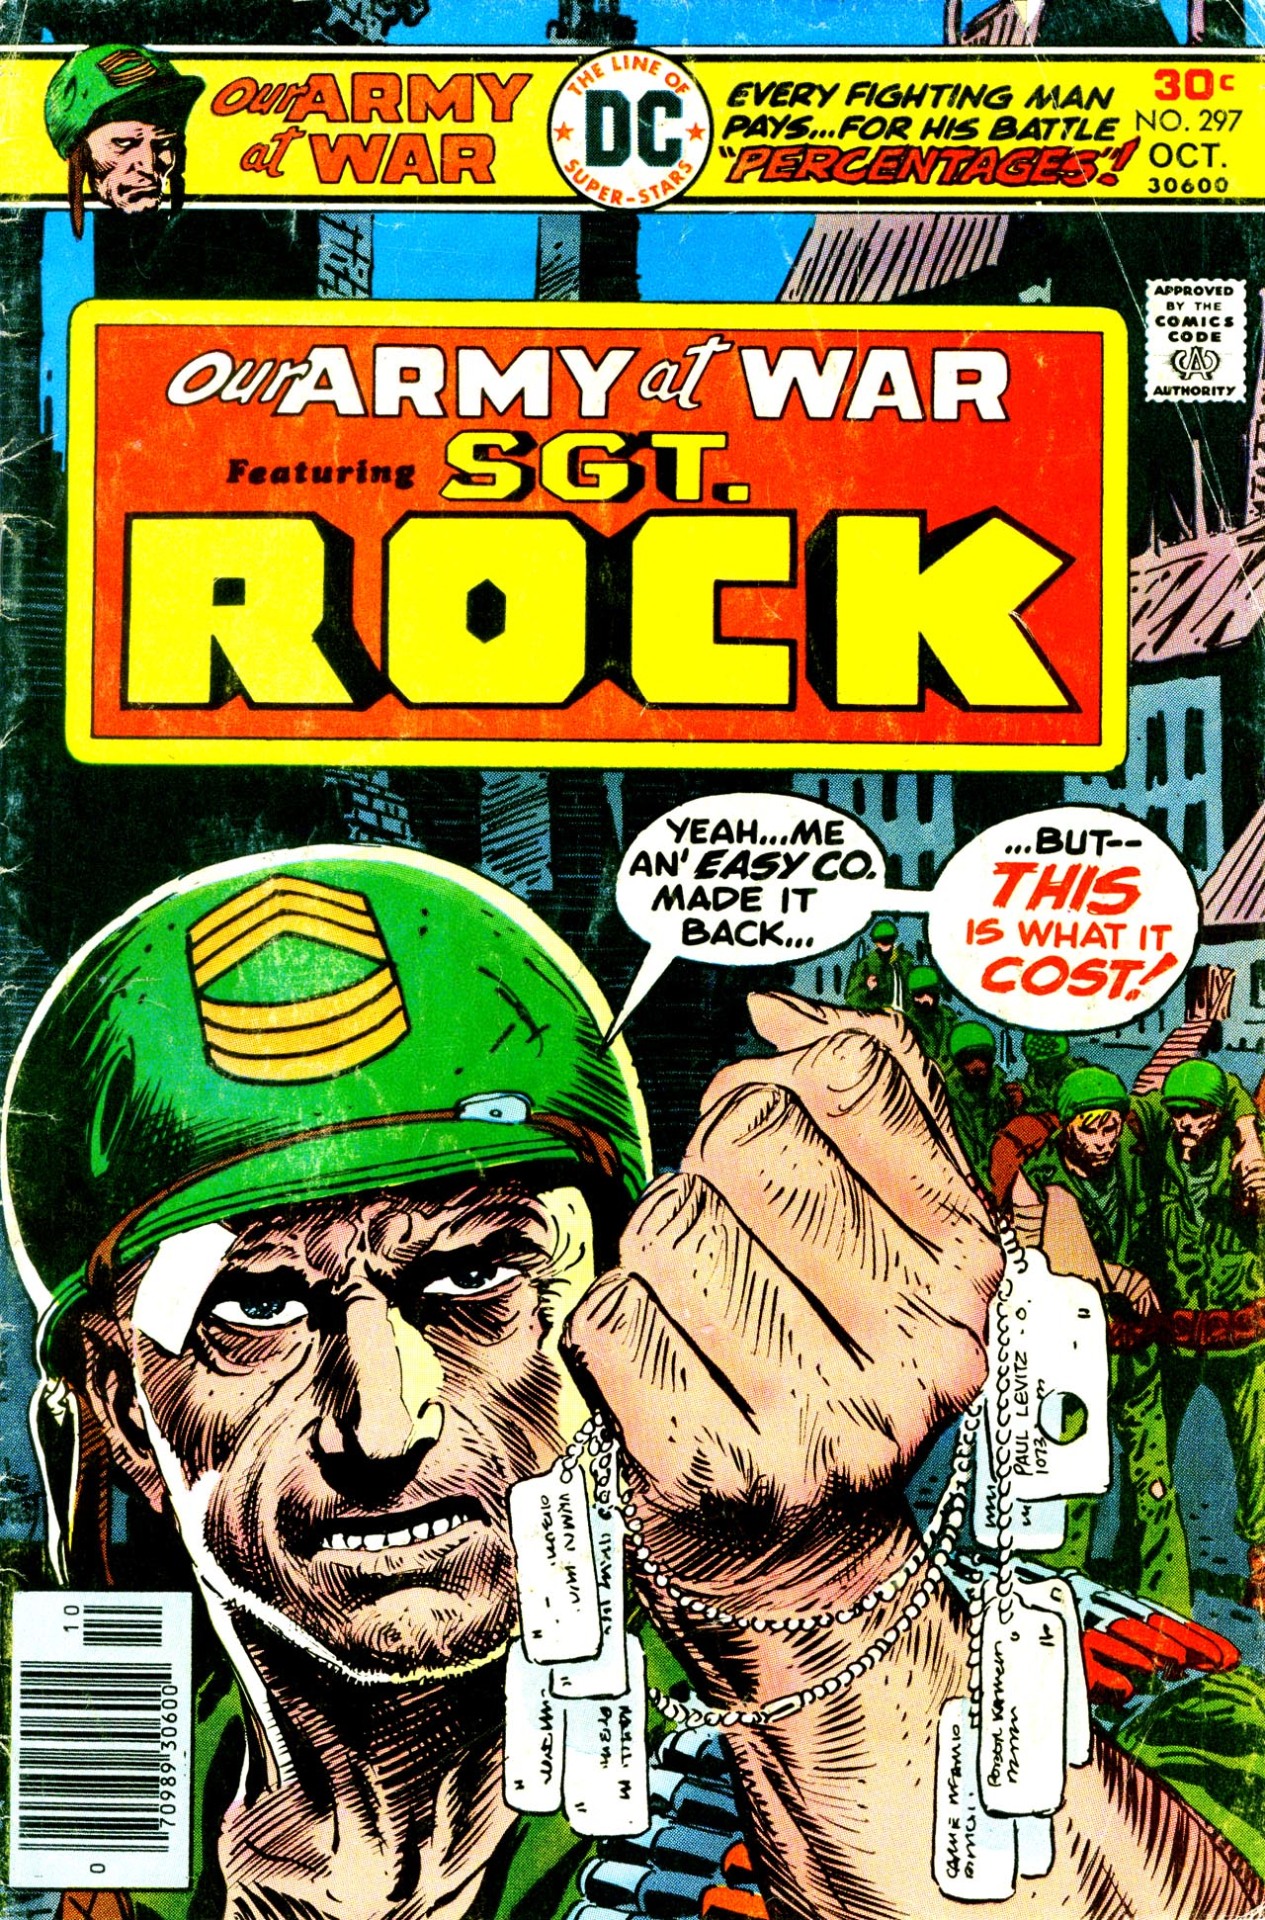 comicbookcovers:  Our Army At War #297, October 1976, cover by Joe Kubert